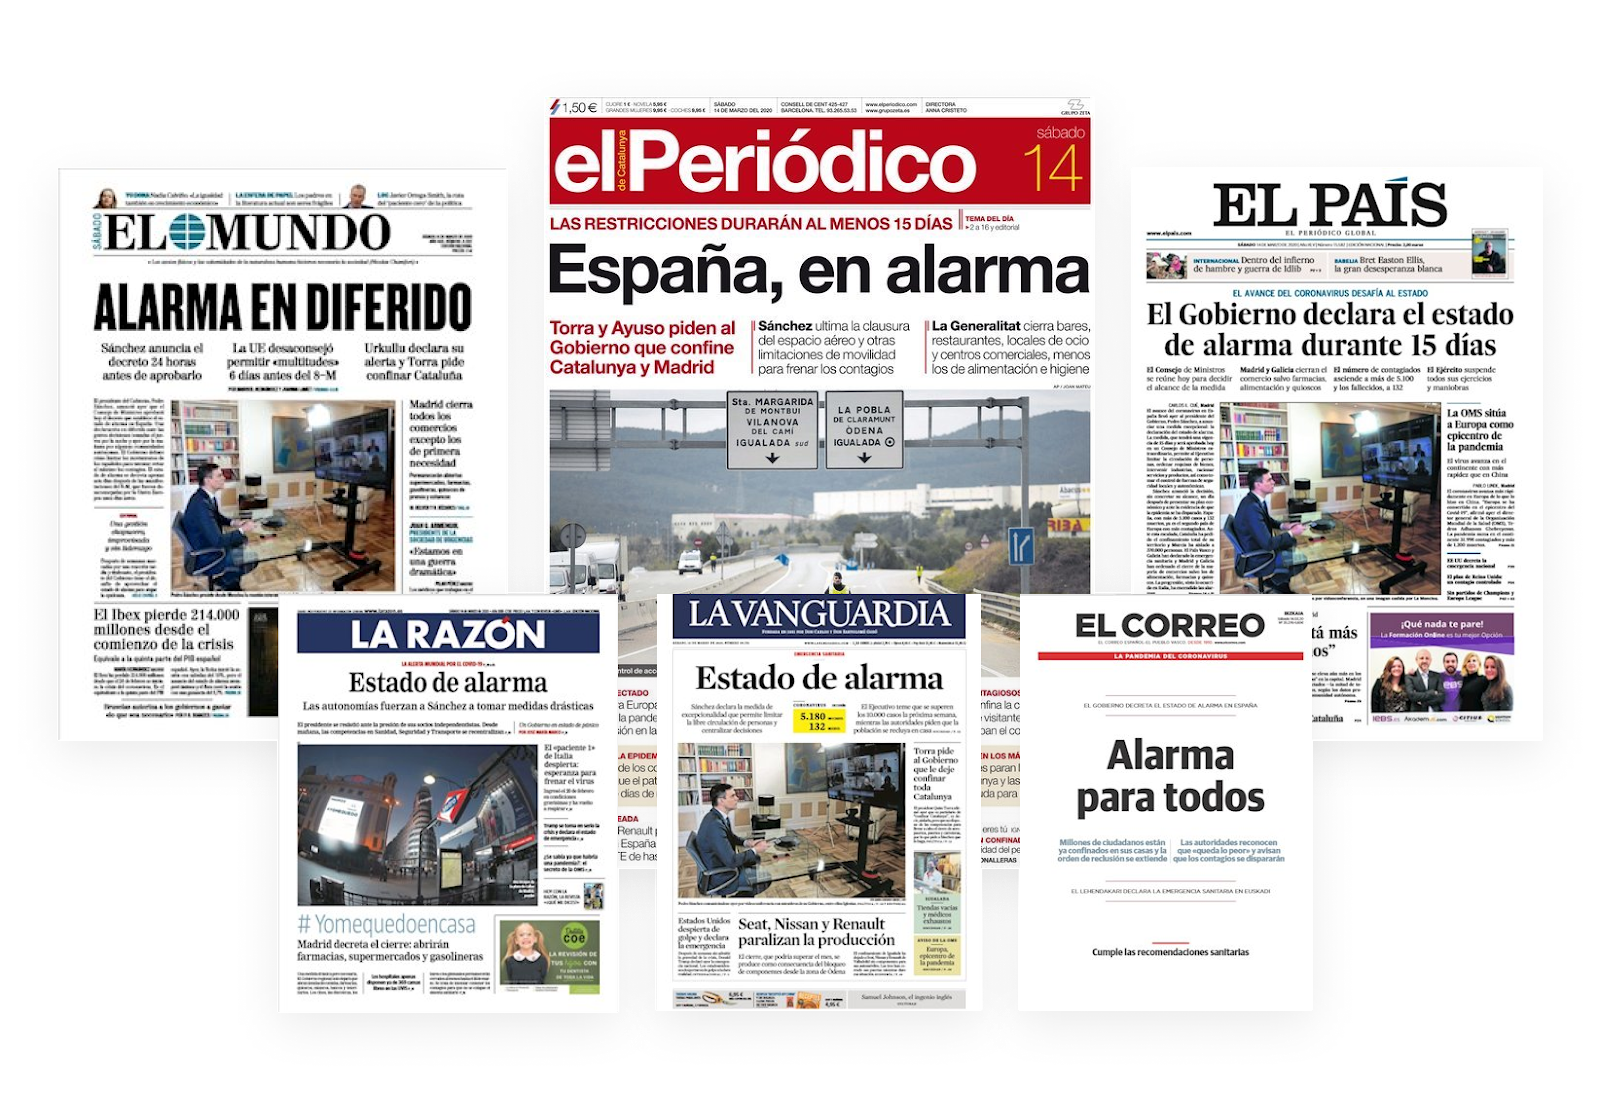 03/20. Newspaper covers the weeks that Spain began with the State of Alarm.